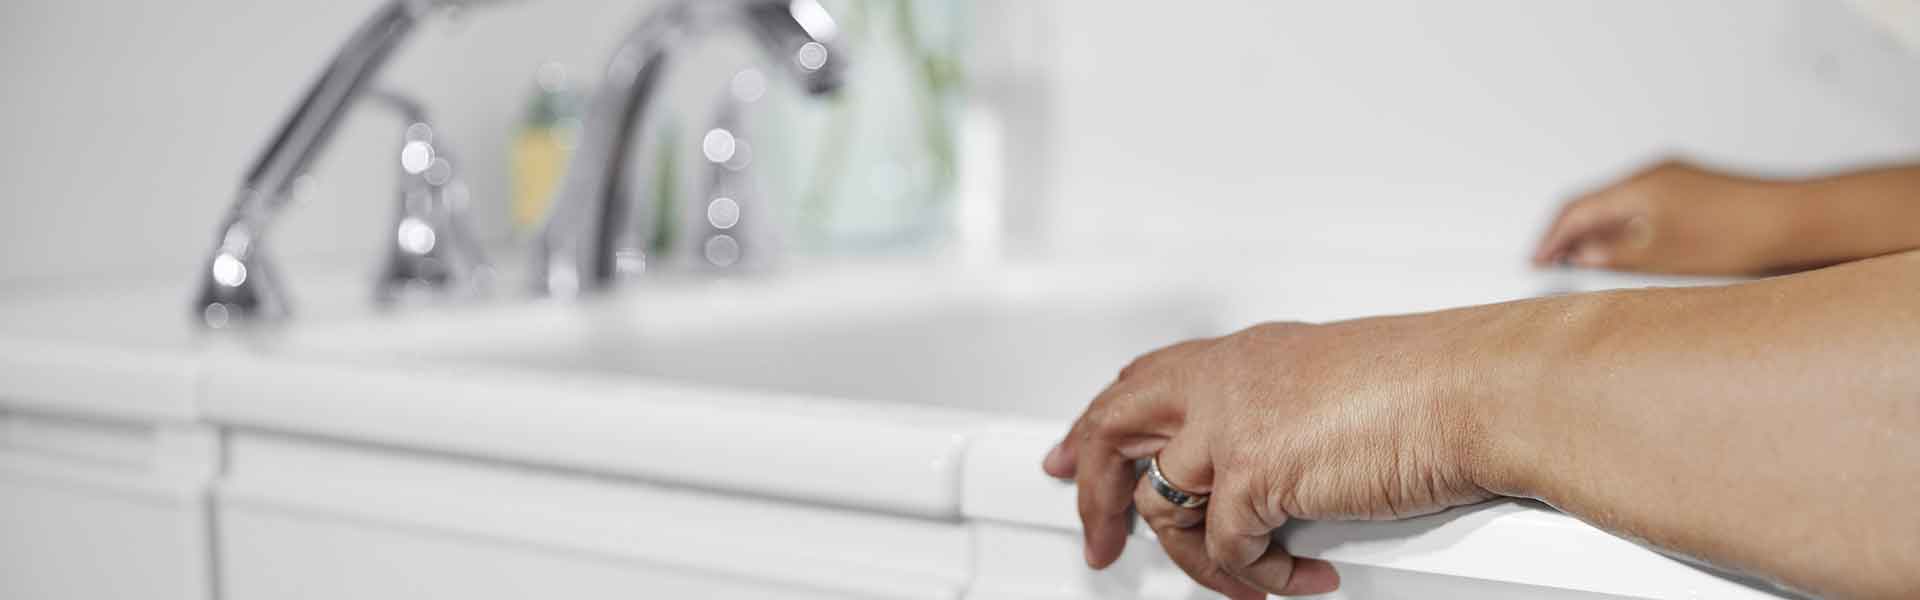 snapshot of woman's arms holding side of walk-in tub while she is in it